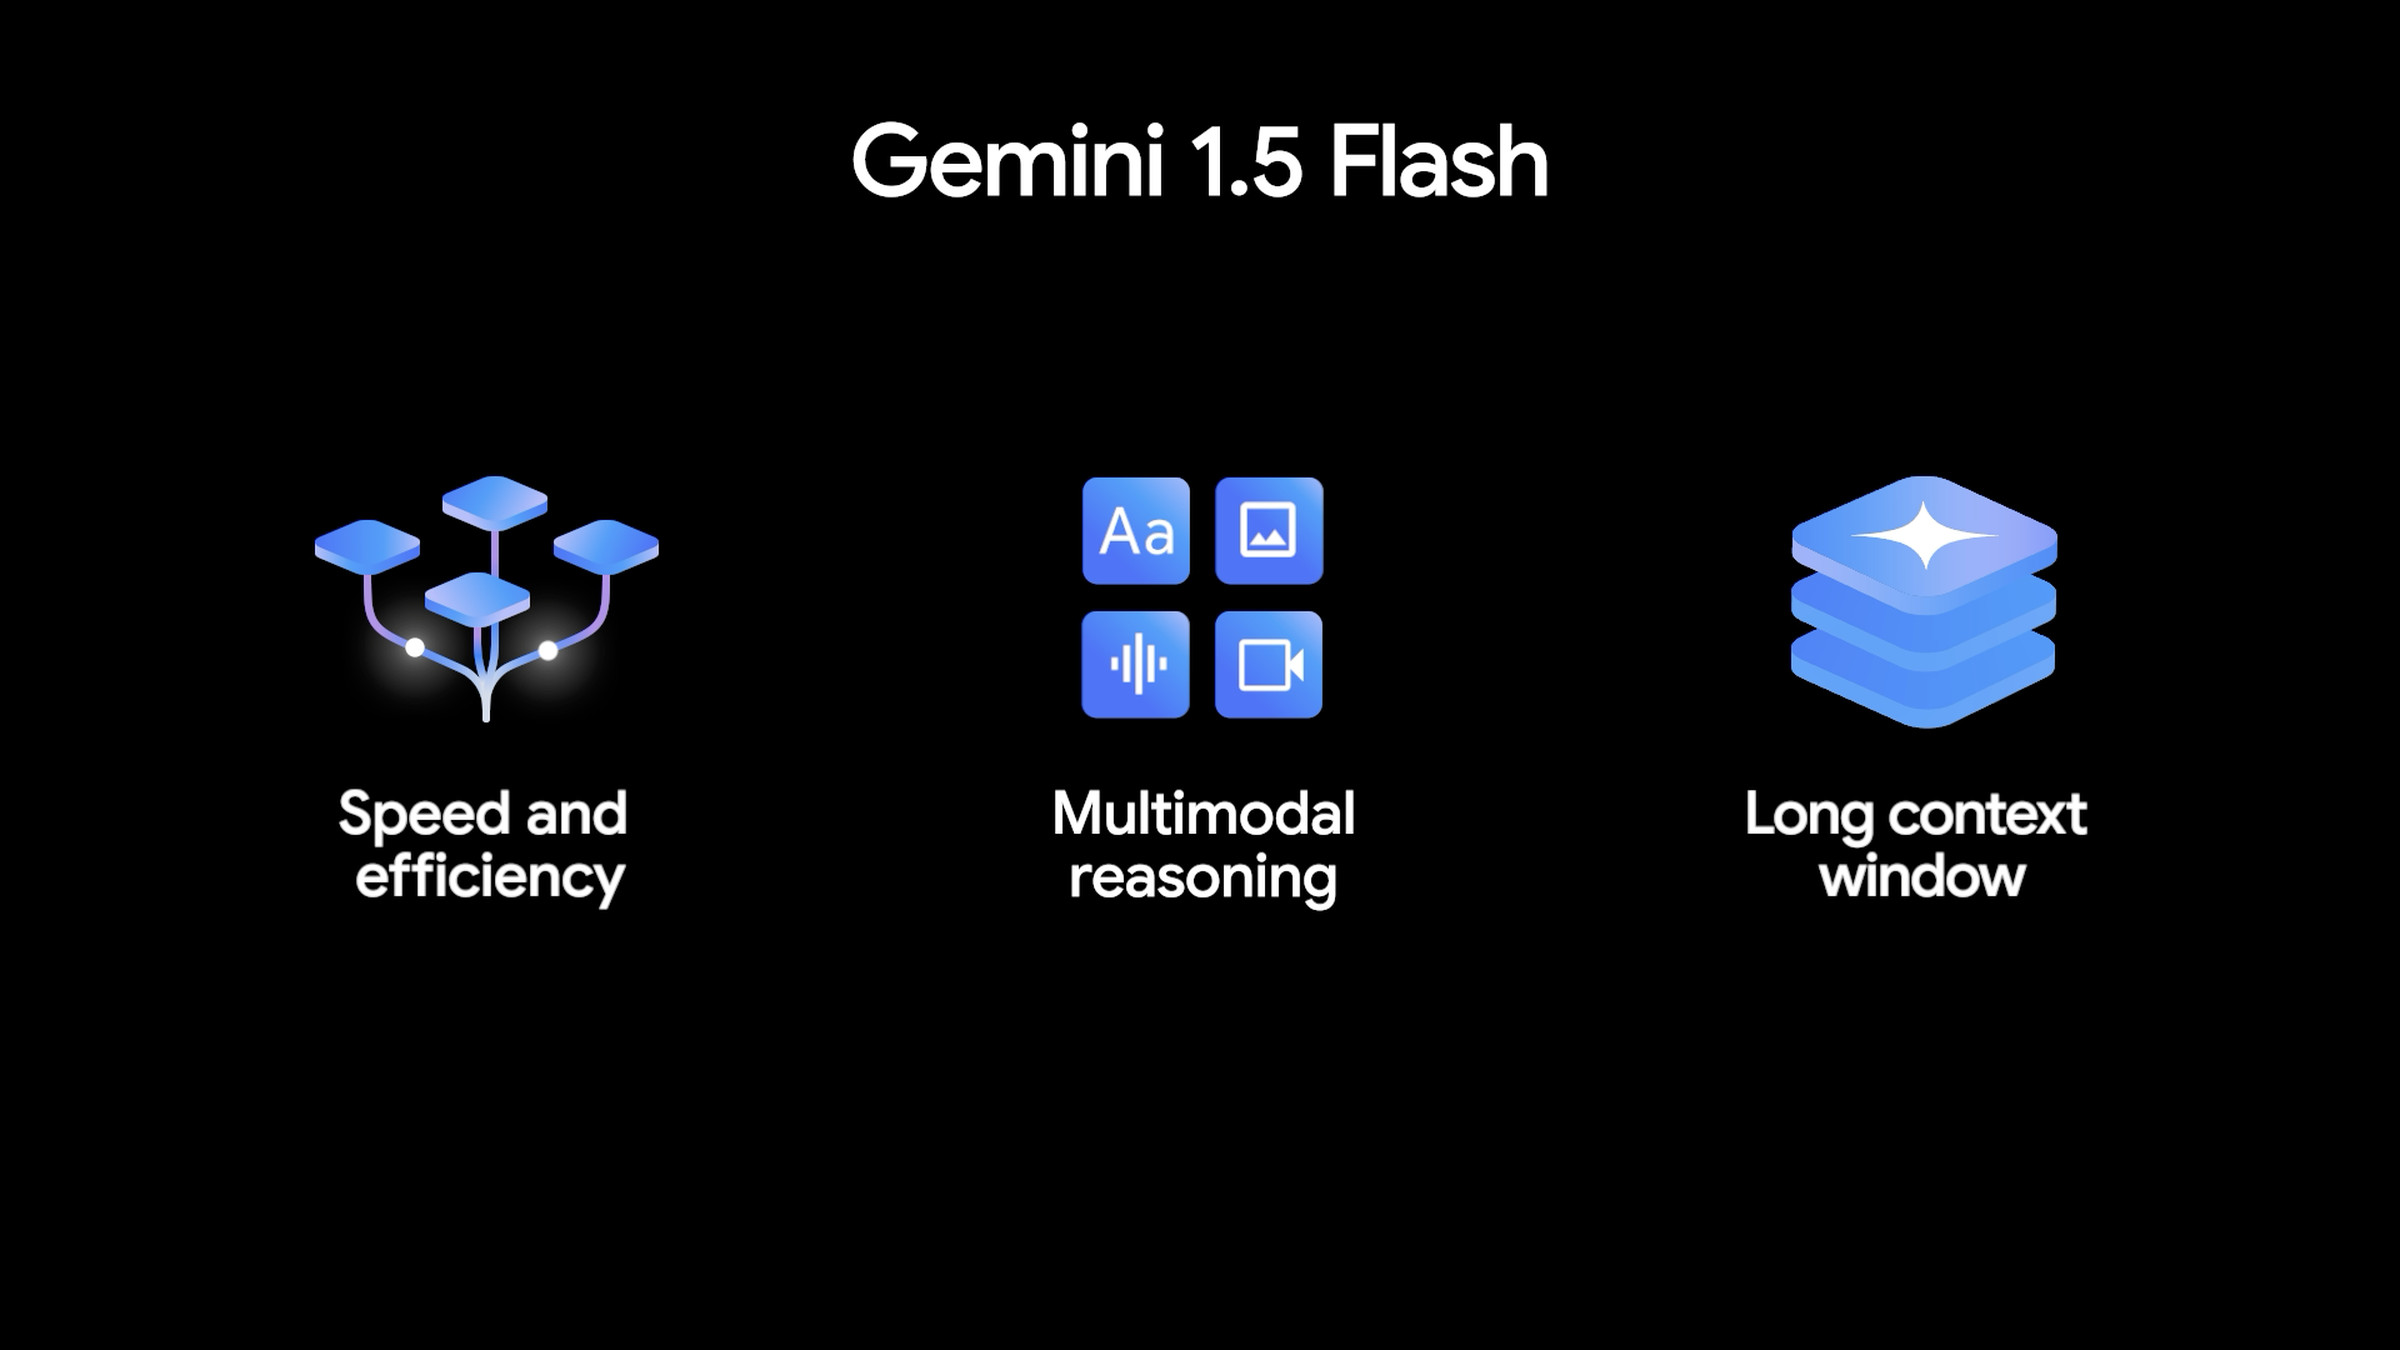 An image showing the benefits of Google’s new Gemini 1.5 Flash model.